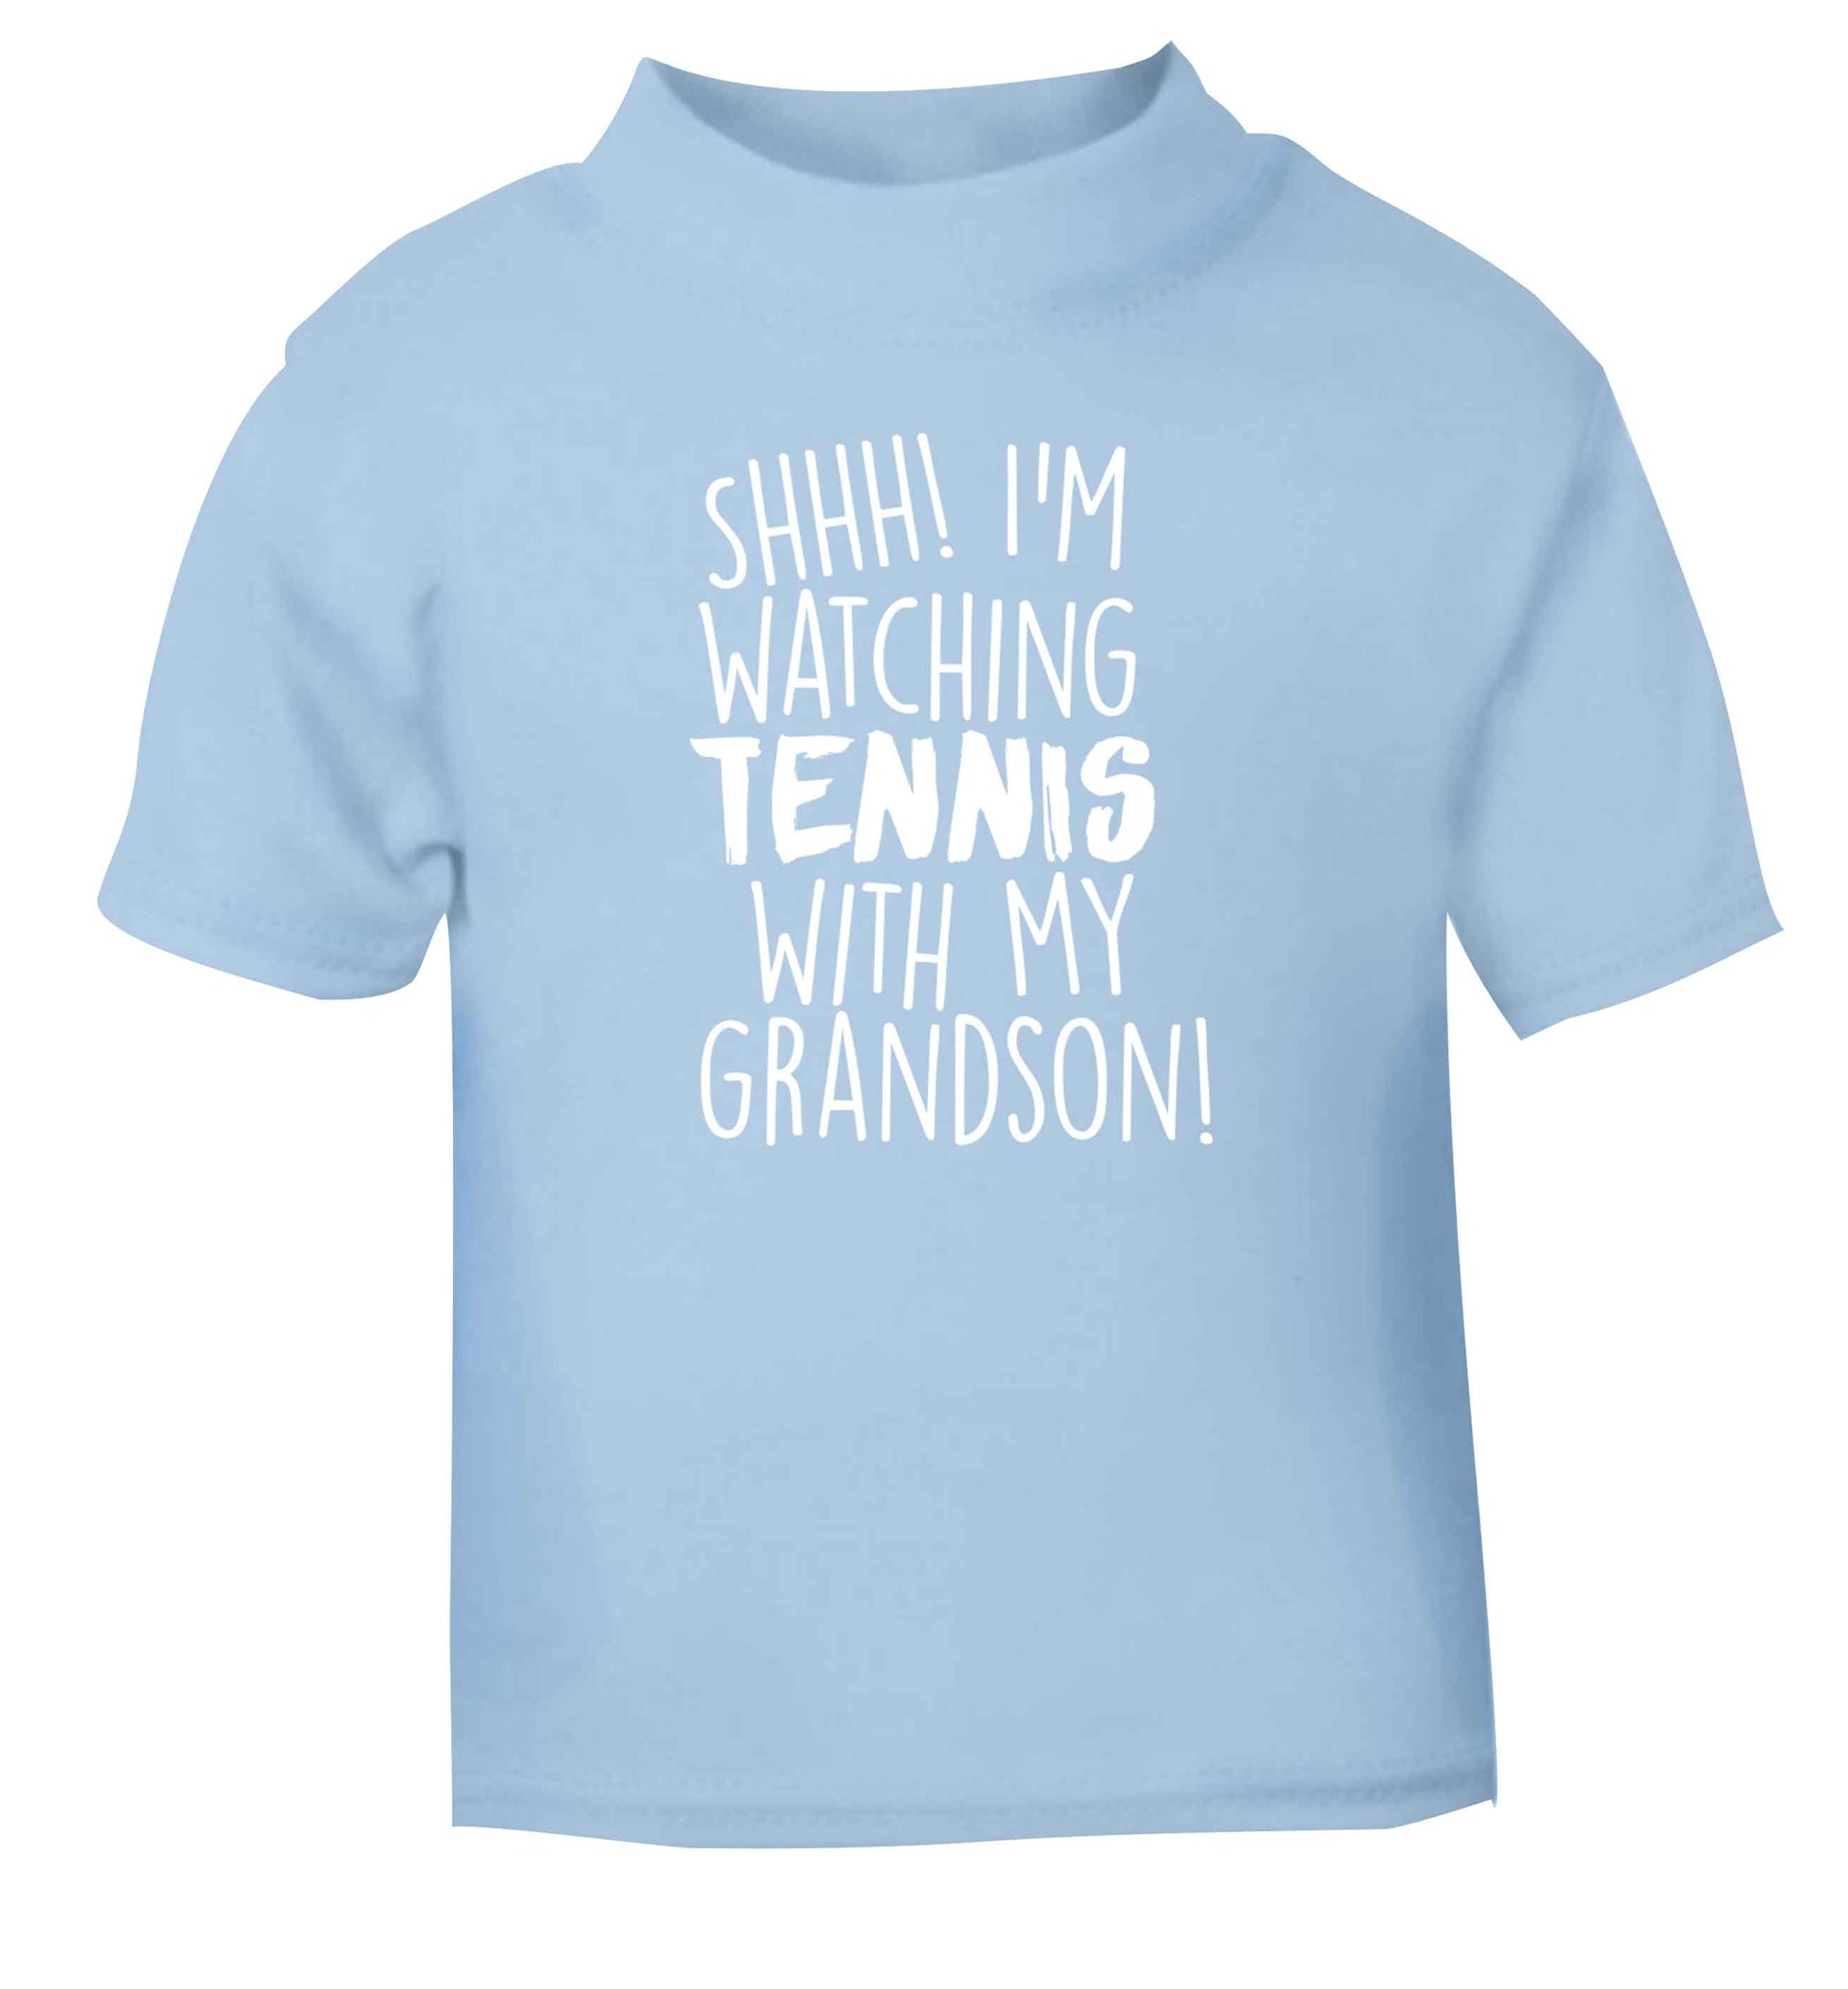 Shh! I'm watching tennis with my grandson! light blue Baby Toddler Tshirt 2 Years